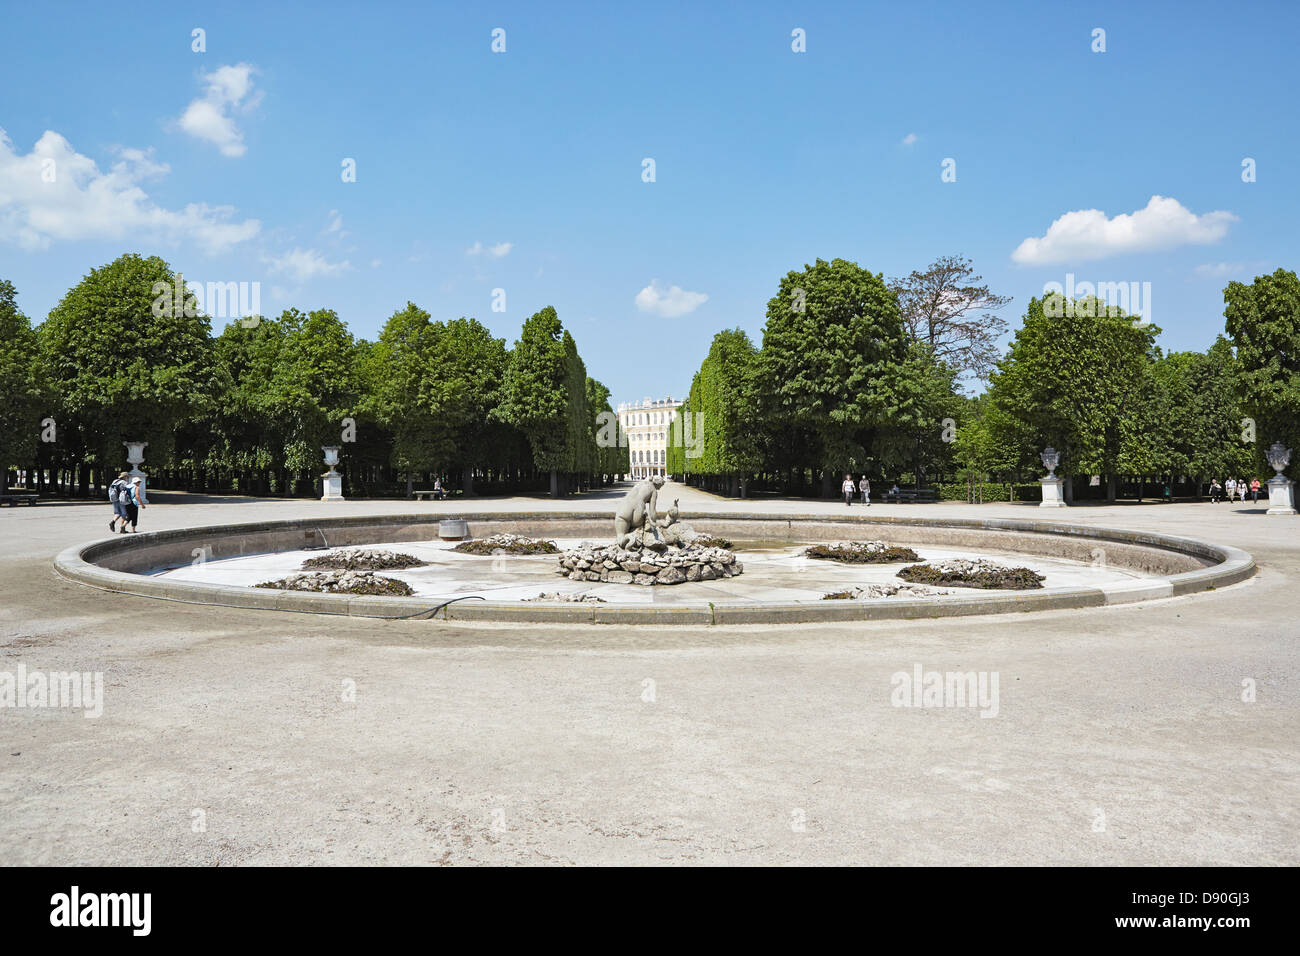 Vienna Schonbrunn palace from a tree lined avenue fountain Stock Photo